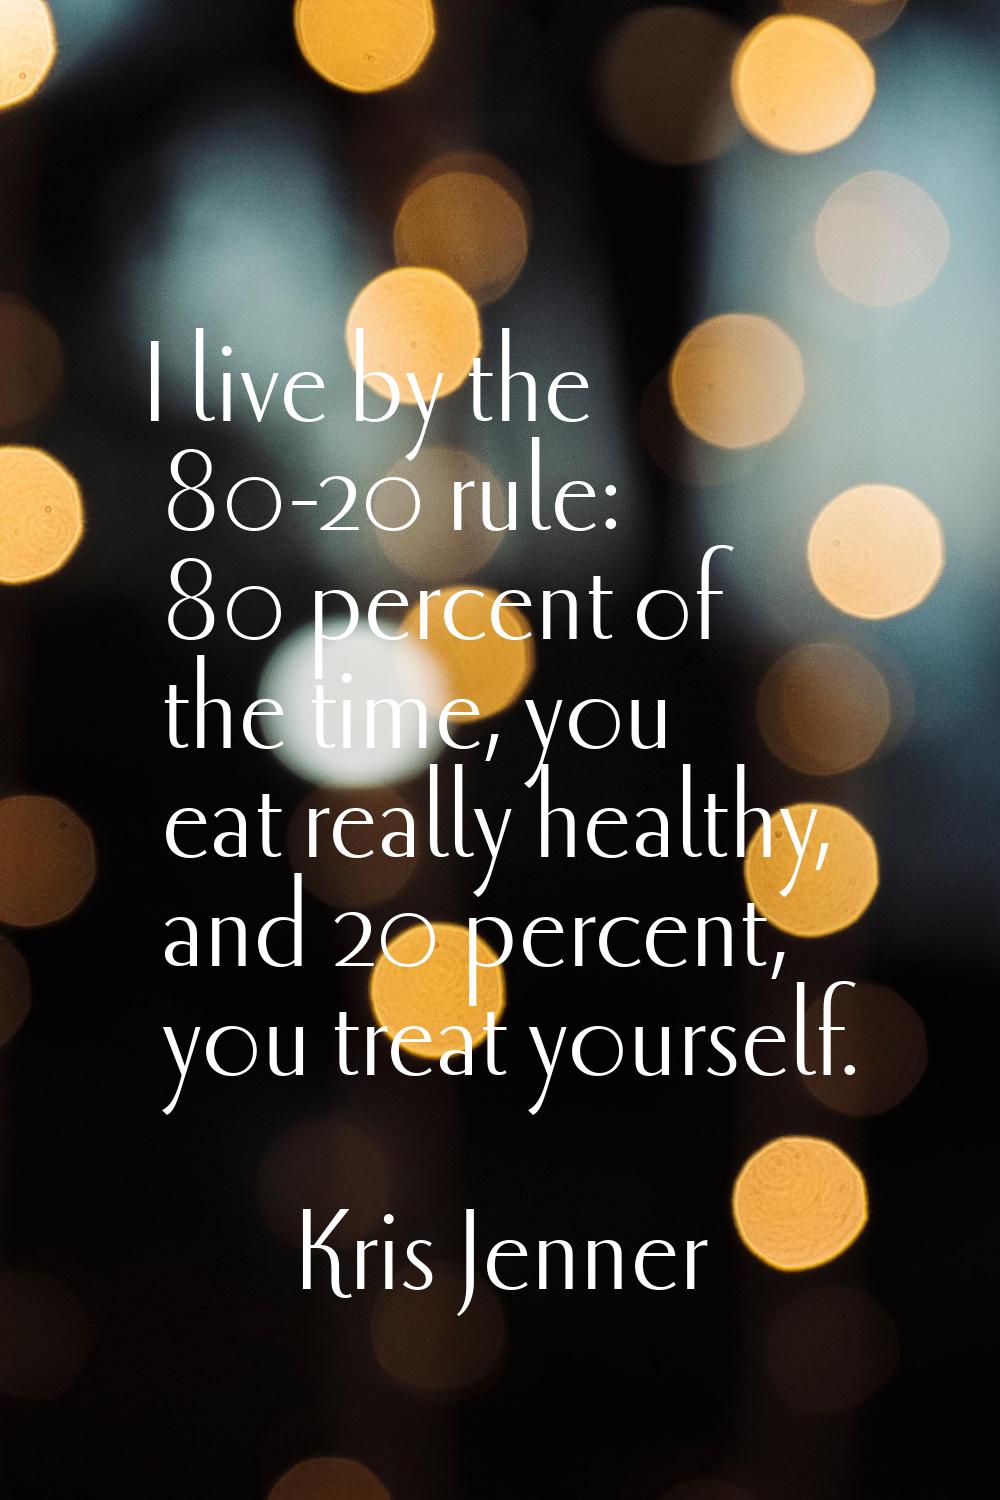 I live by the 80-20 rule: 80 percent of the time, you eat really healthy, and 20 percent, you treat